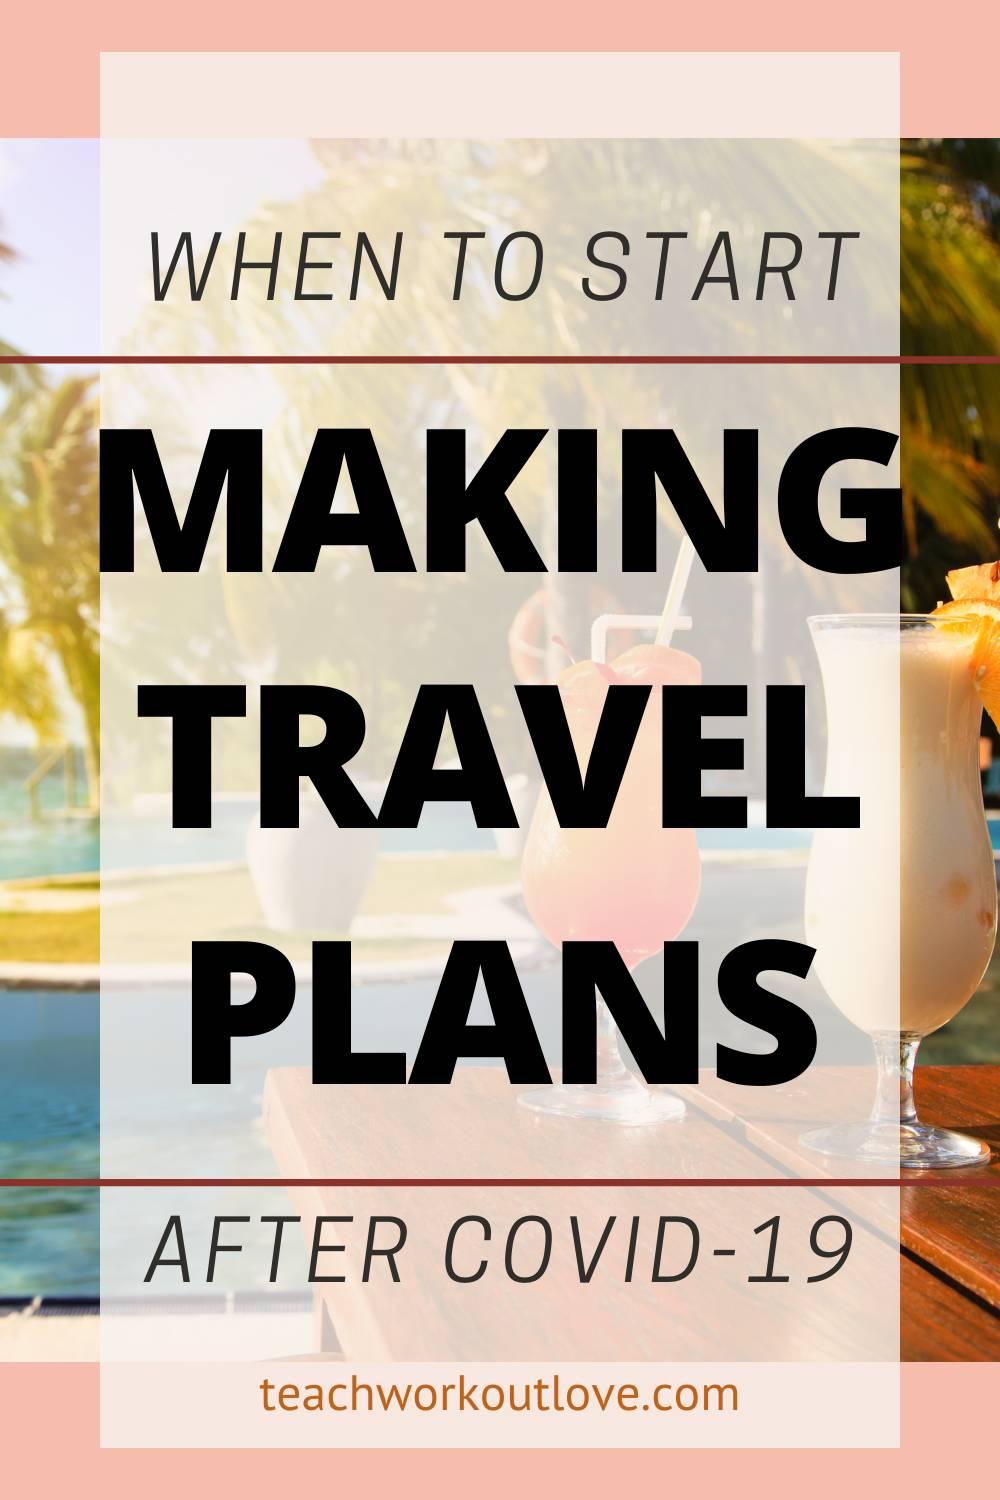 Do you need a vacation after this COVID mess? Let’s look at the current travel situation, its restrictions, and how to set travel plans.